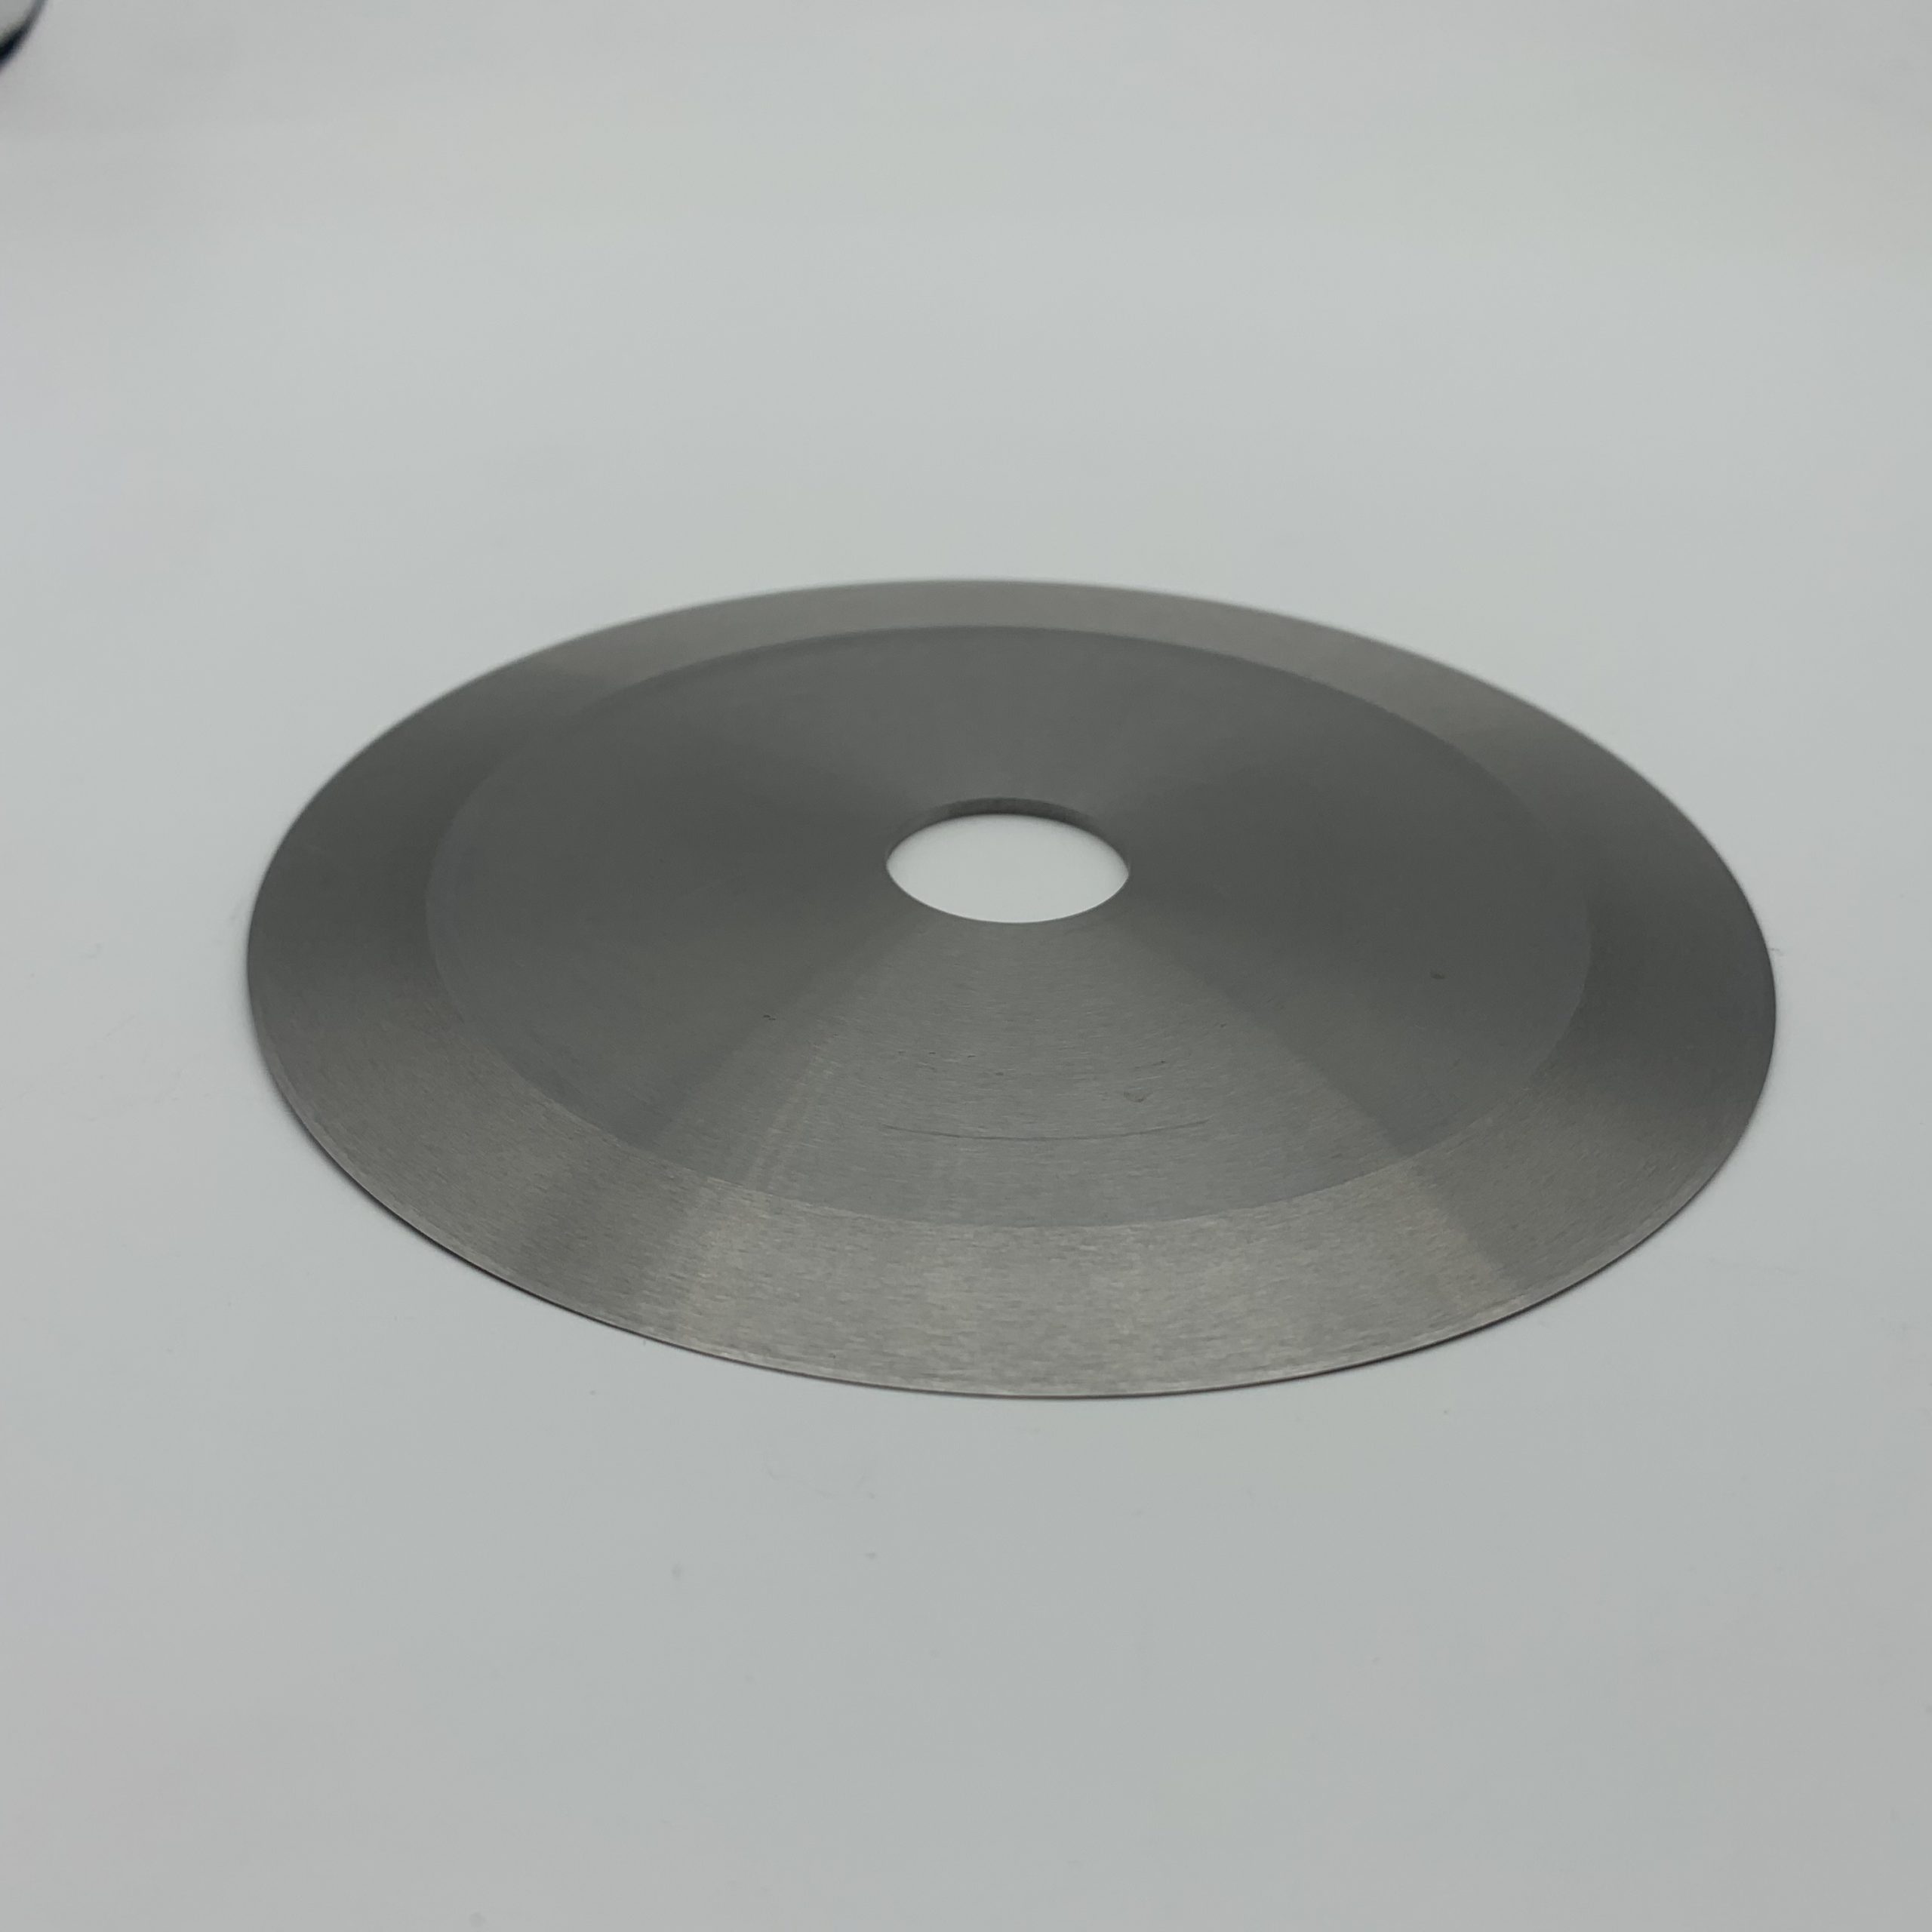 Circular Slitter Blades Dished Top Knife - China 60mm Rotary Cutter Blades,  Tungsten Carbide Cutter Blade